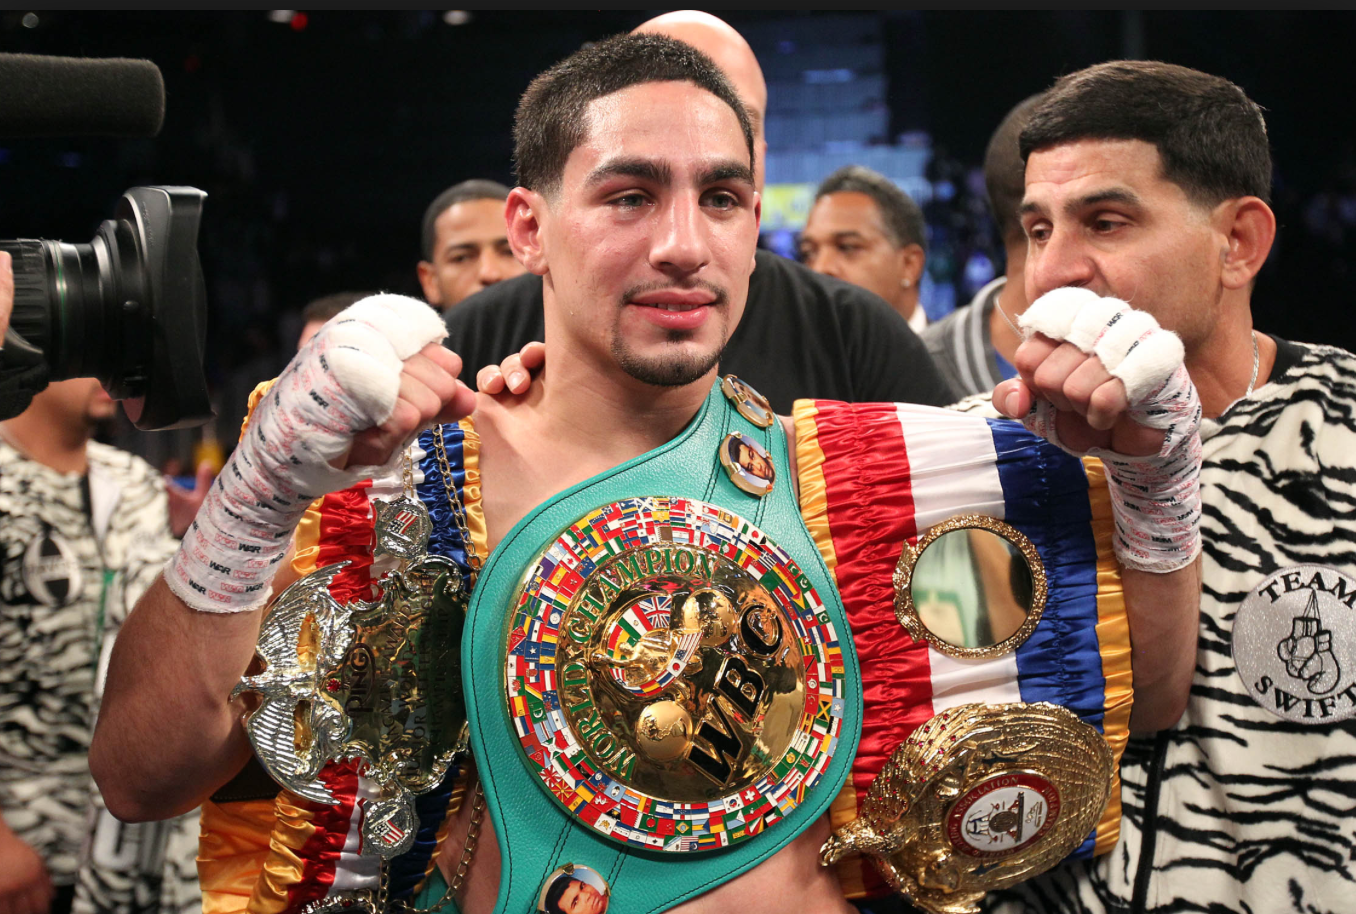 ISlide Partners with Boxing World Champion Danny "Swift" Garcia